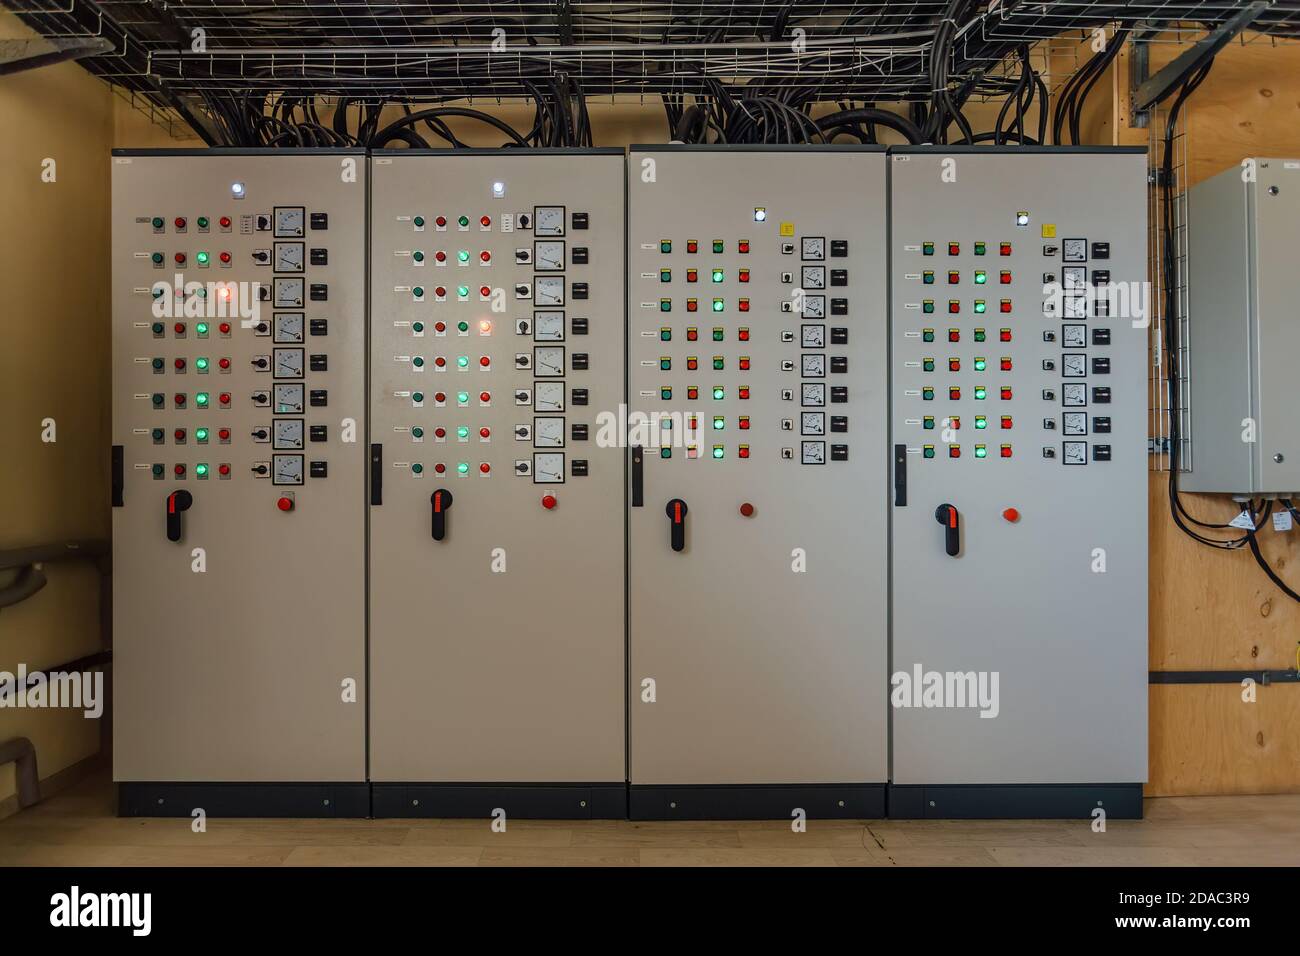 Electrical switchgear cabinets with control panels with indicator lights in factory Stock Photo